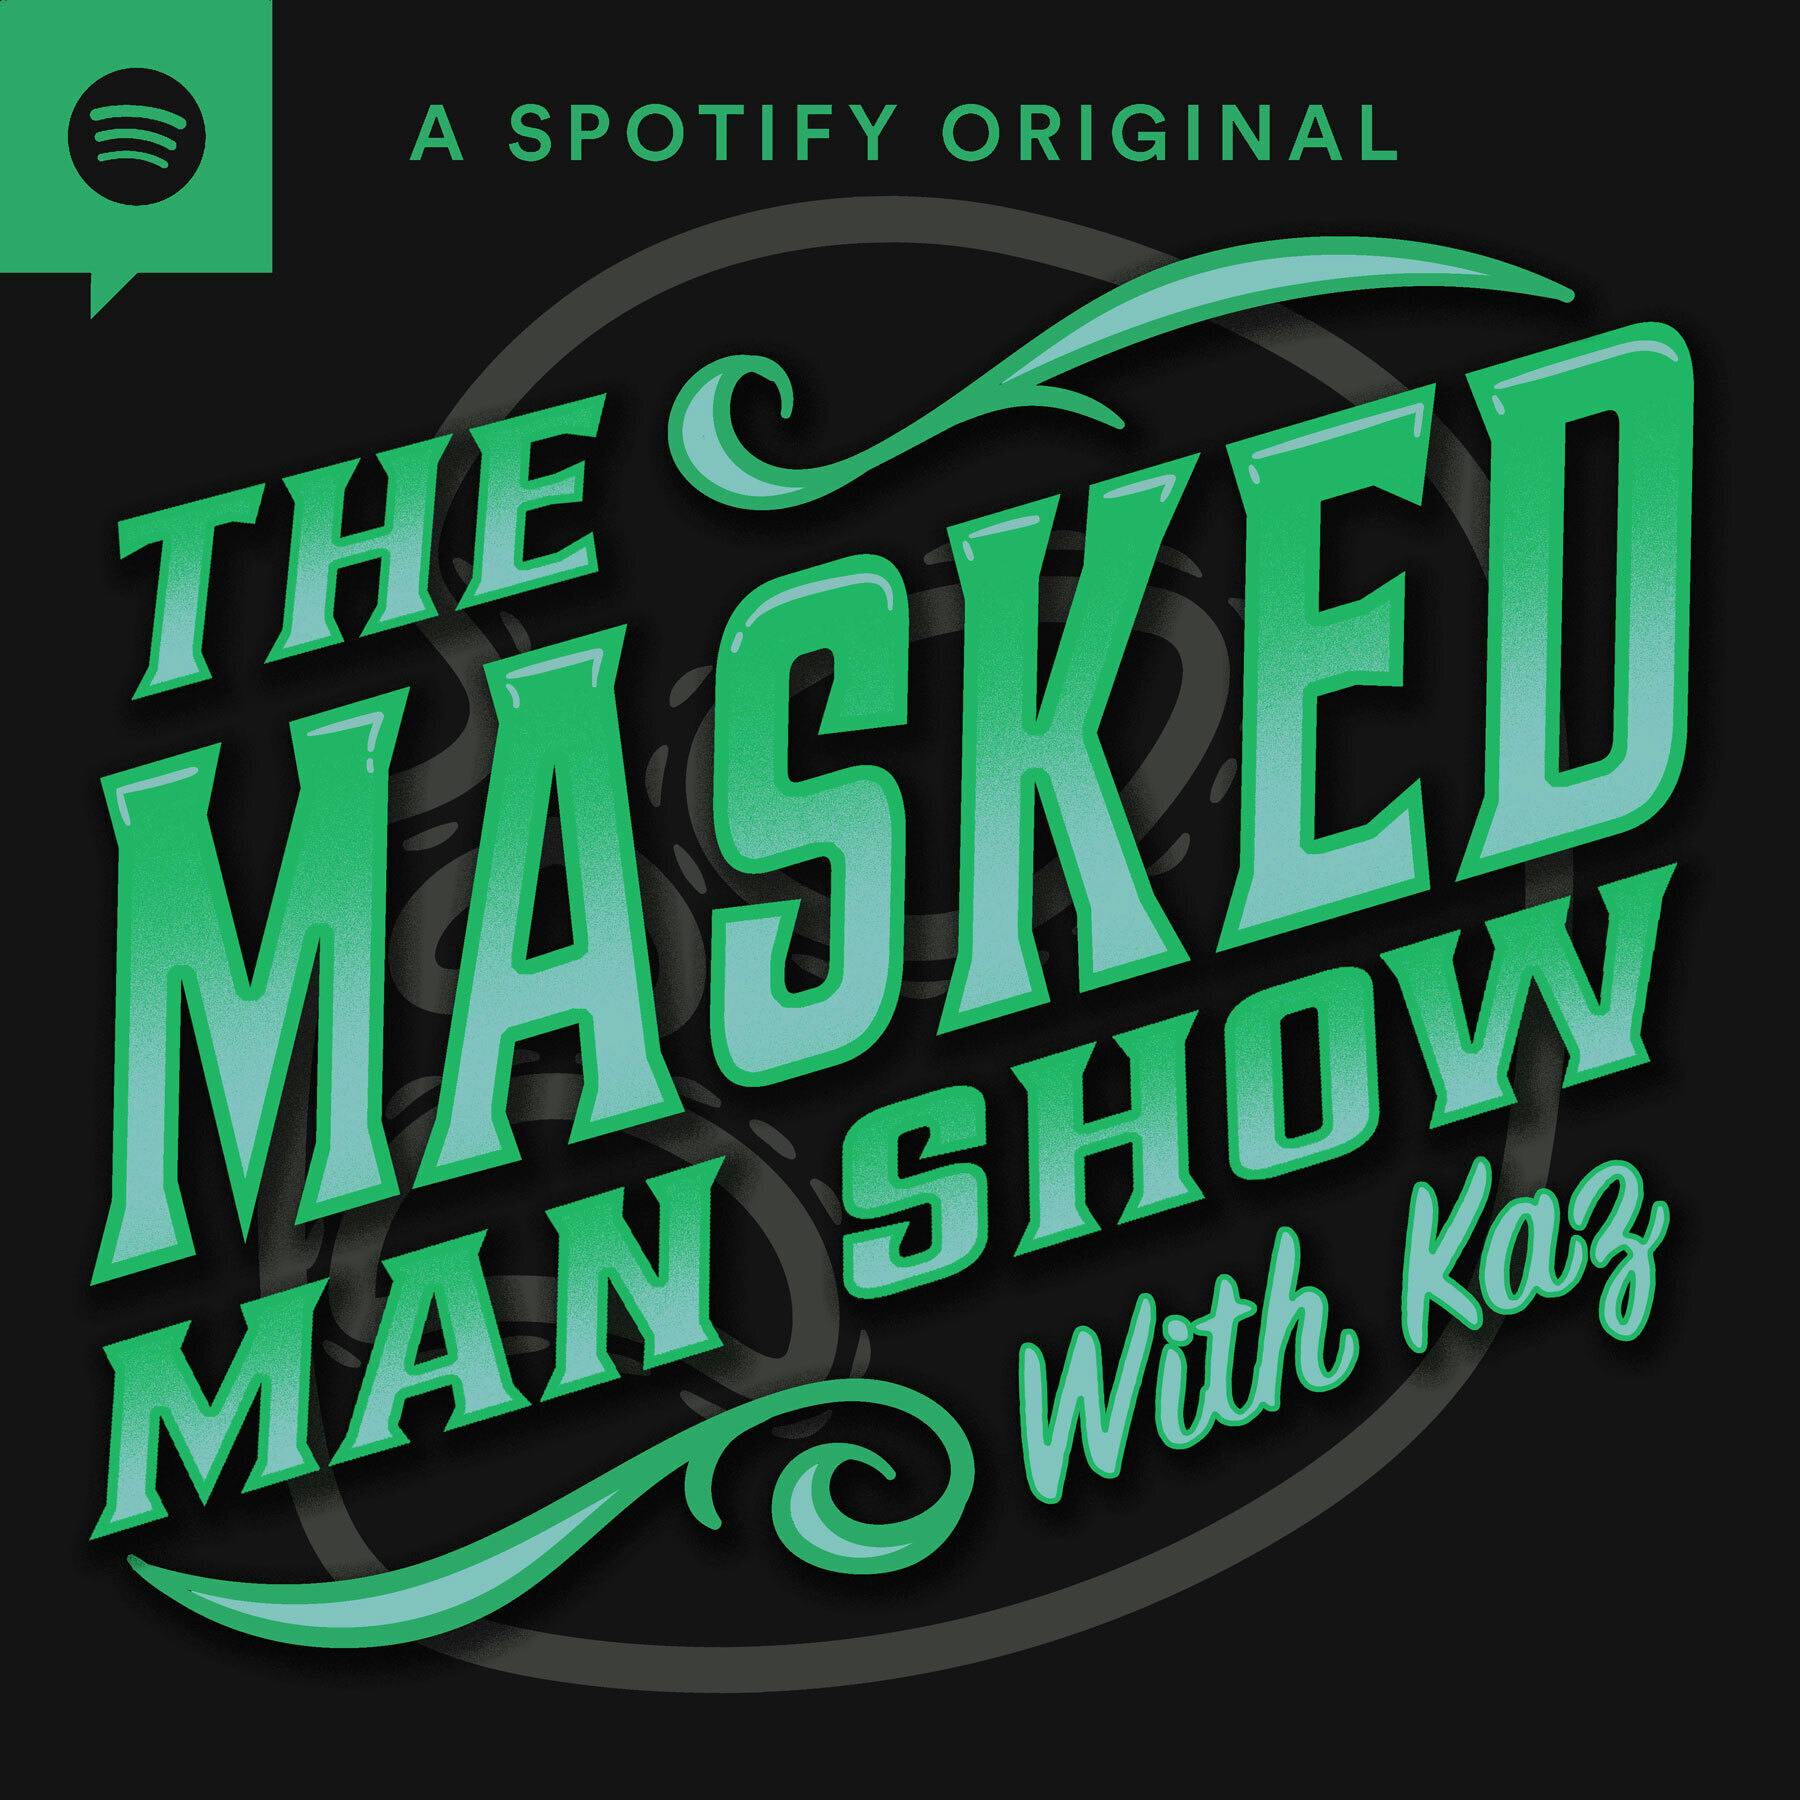 Planning for Sting and Rey Mysterio’s Retirements | The Masked Man Show